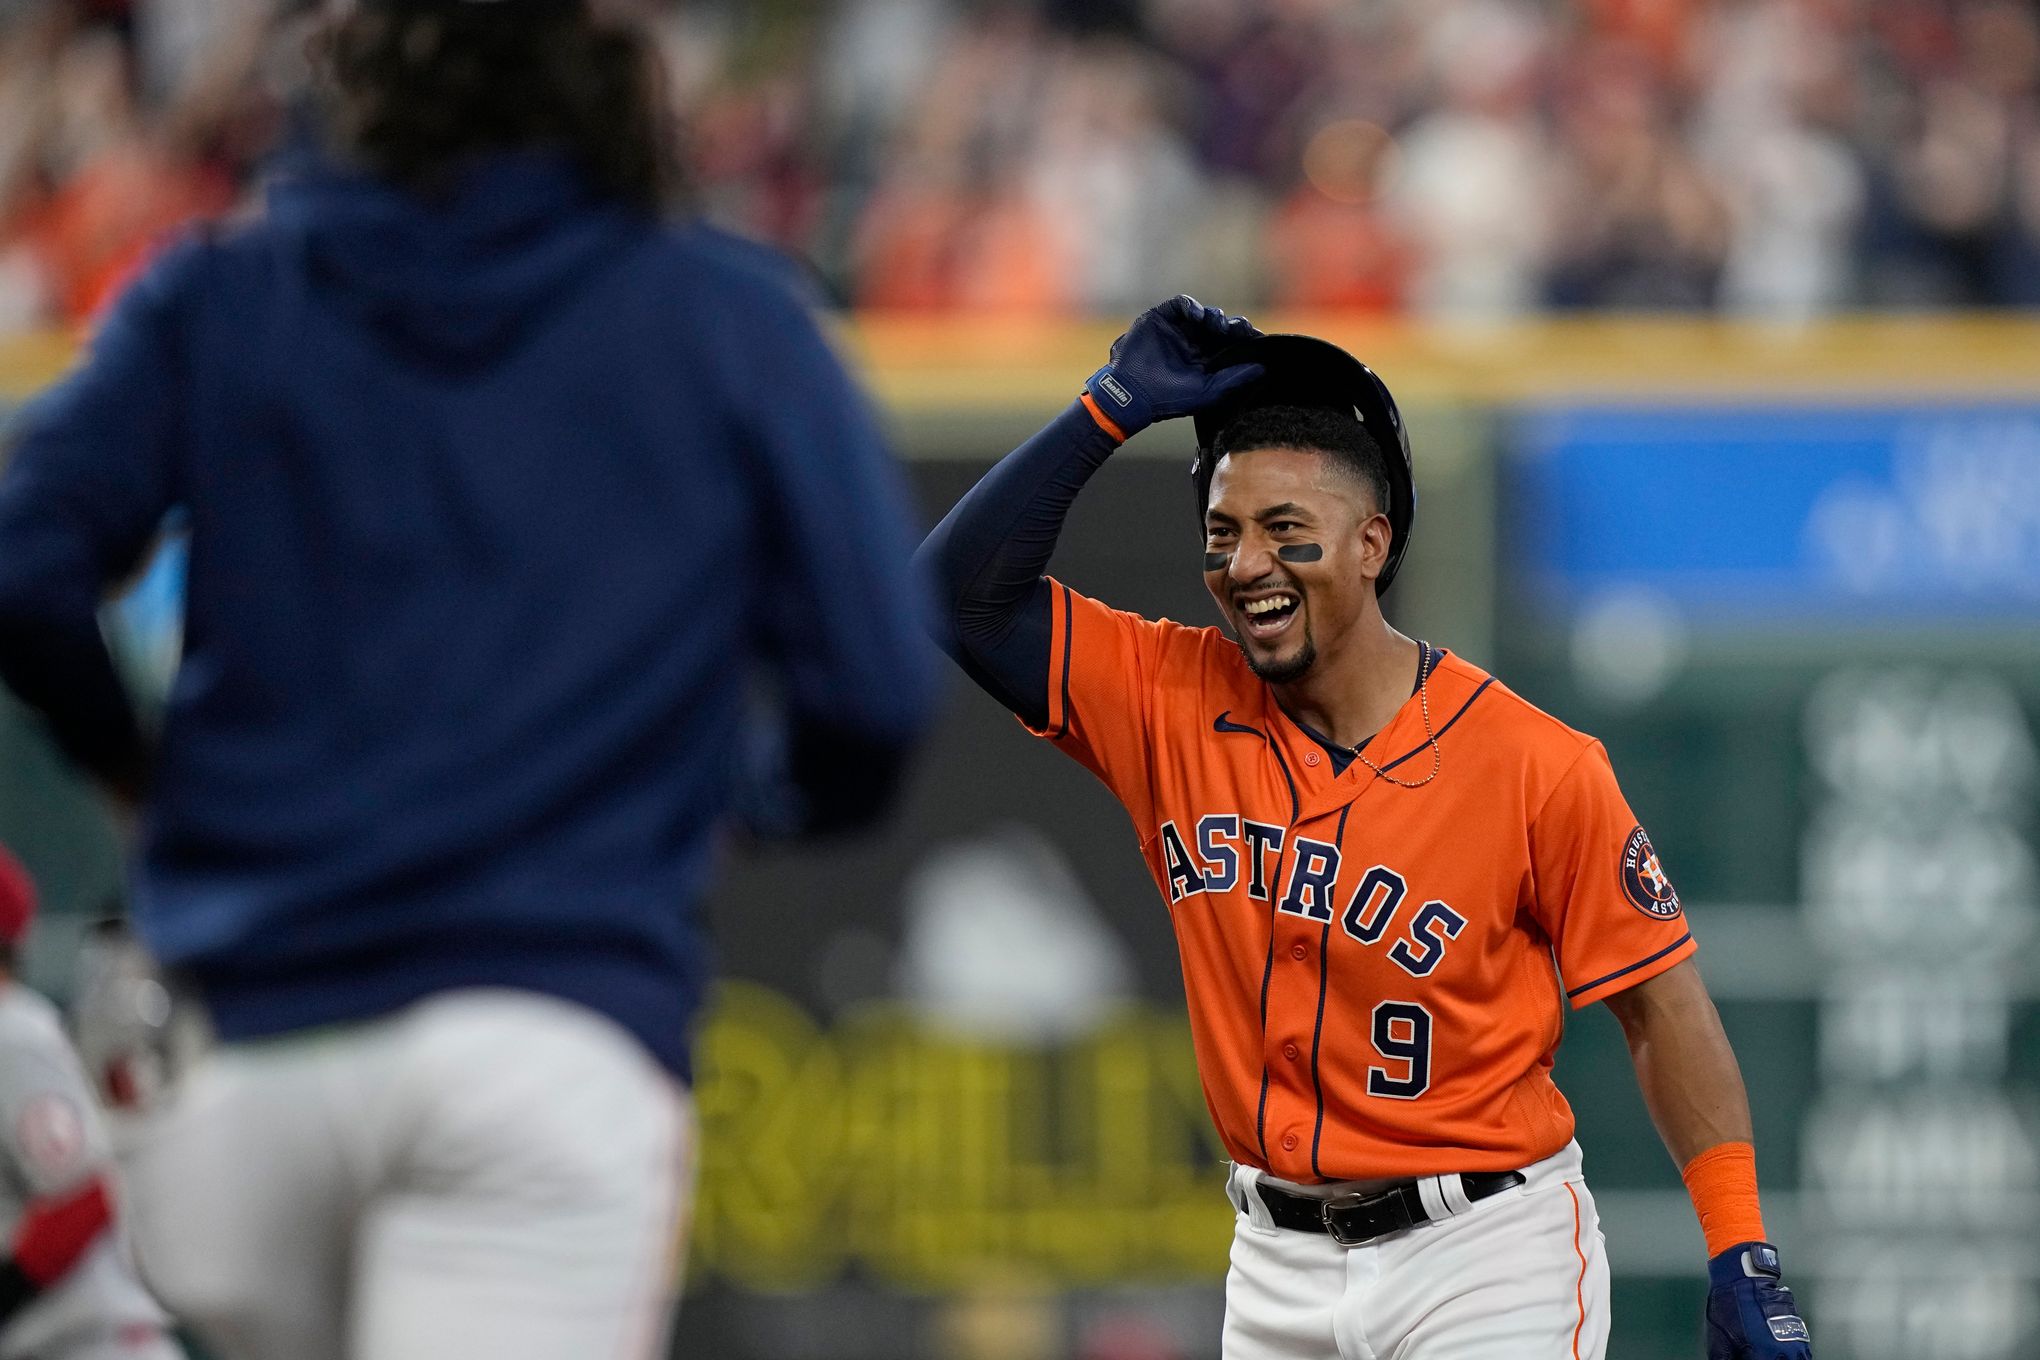 Astros first baseman Yuli Gurriel remains out for Angels opener